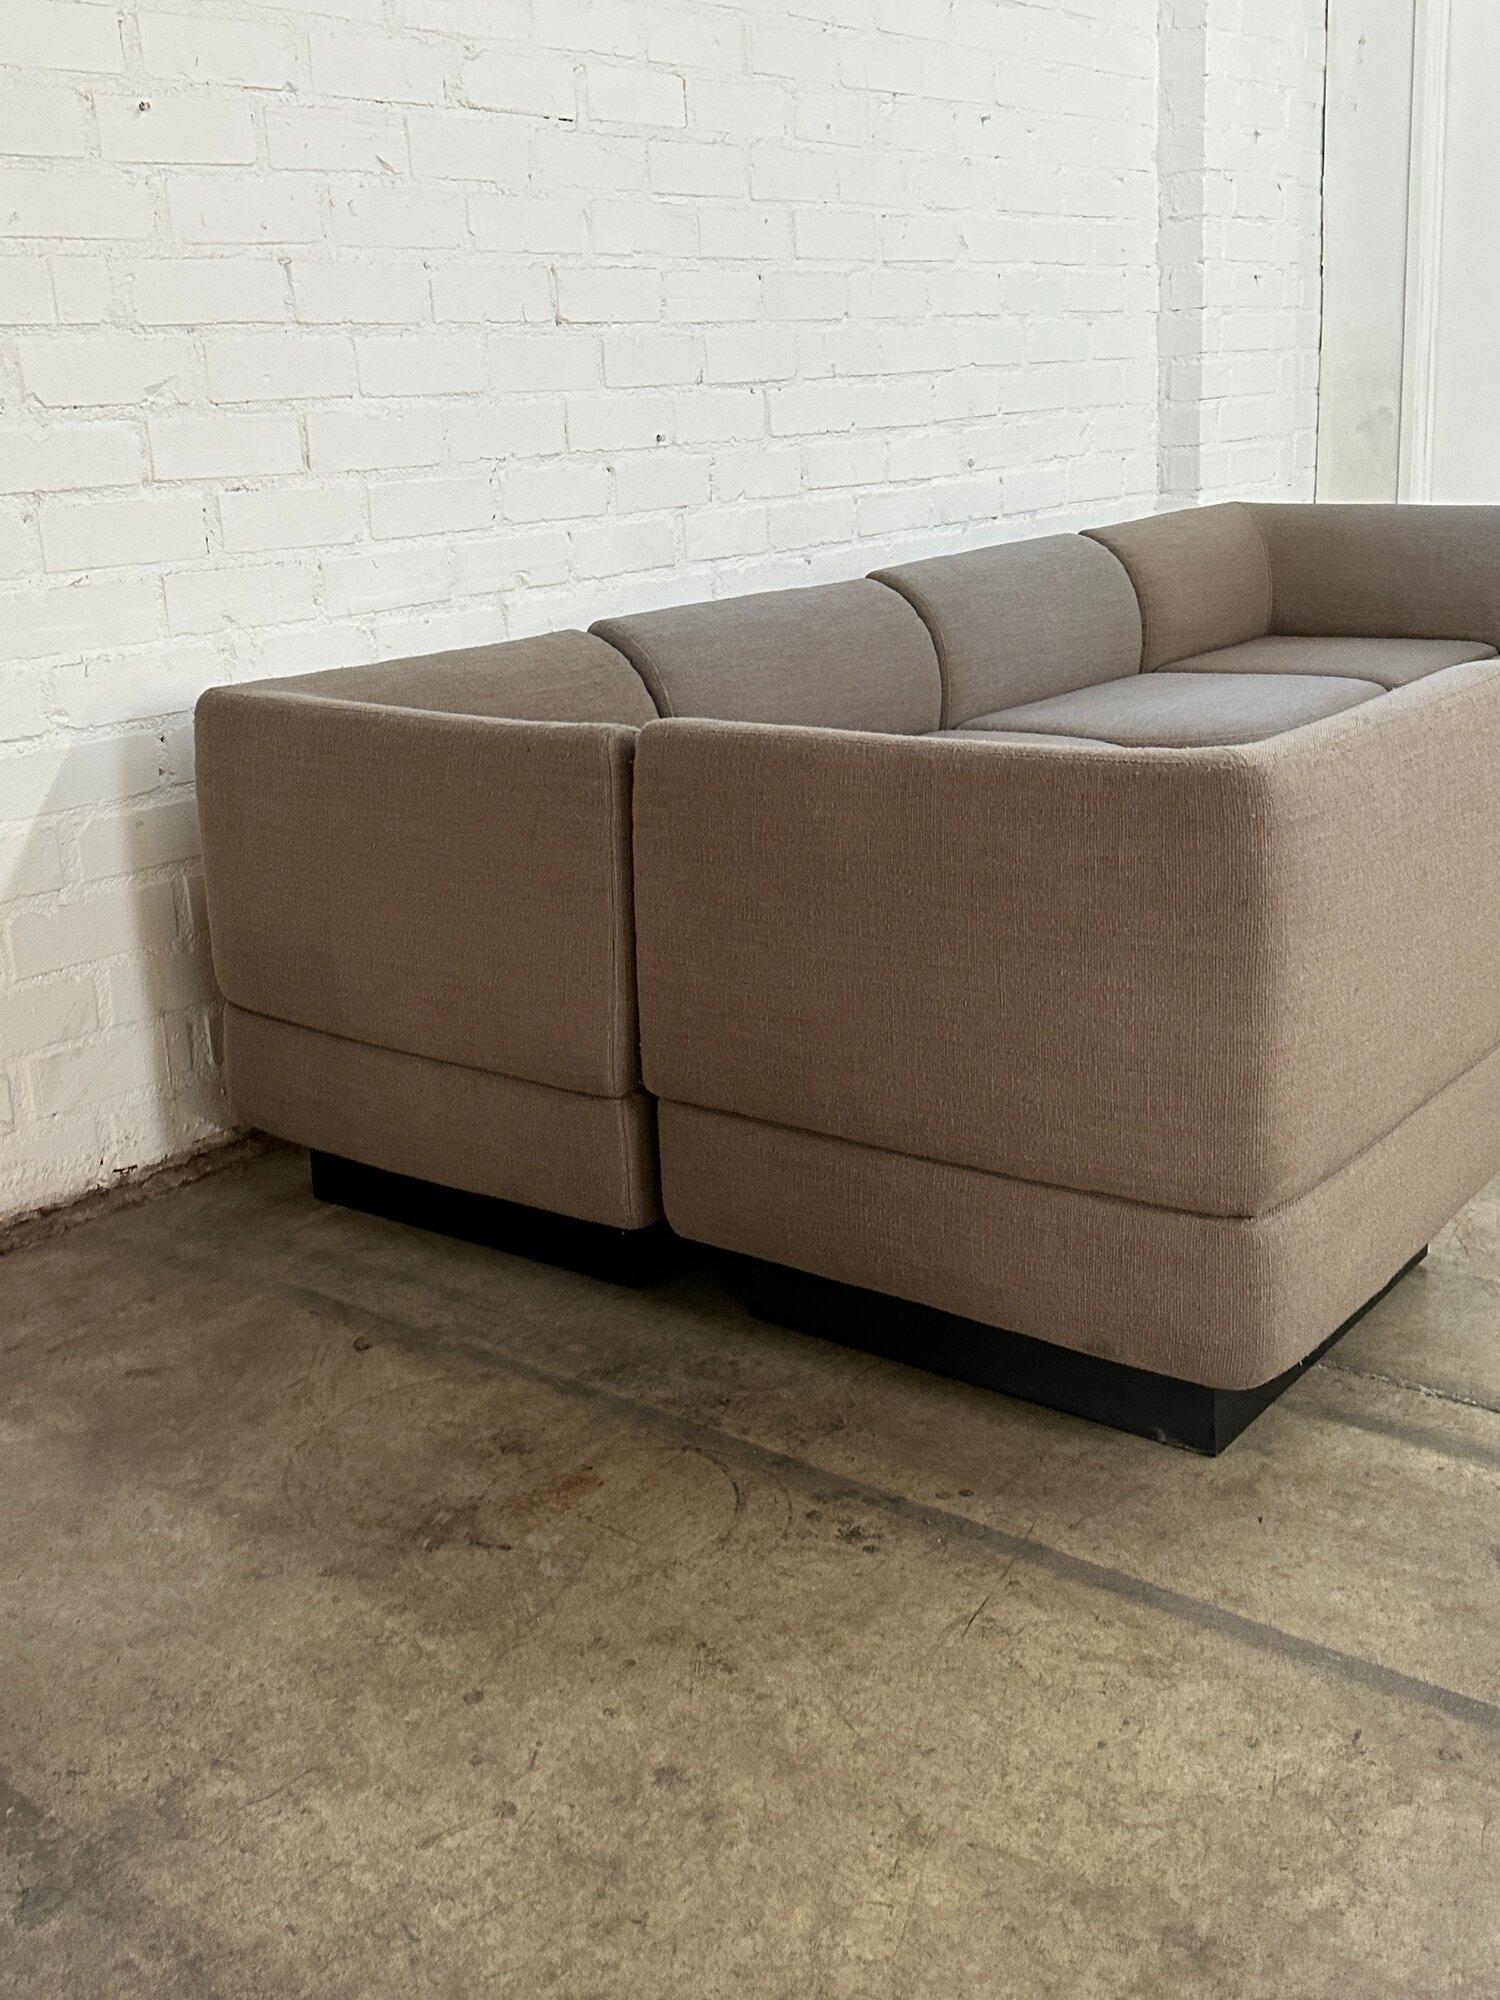 Modular seating by Harvey Probber For Sale 1